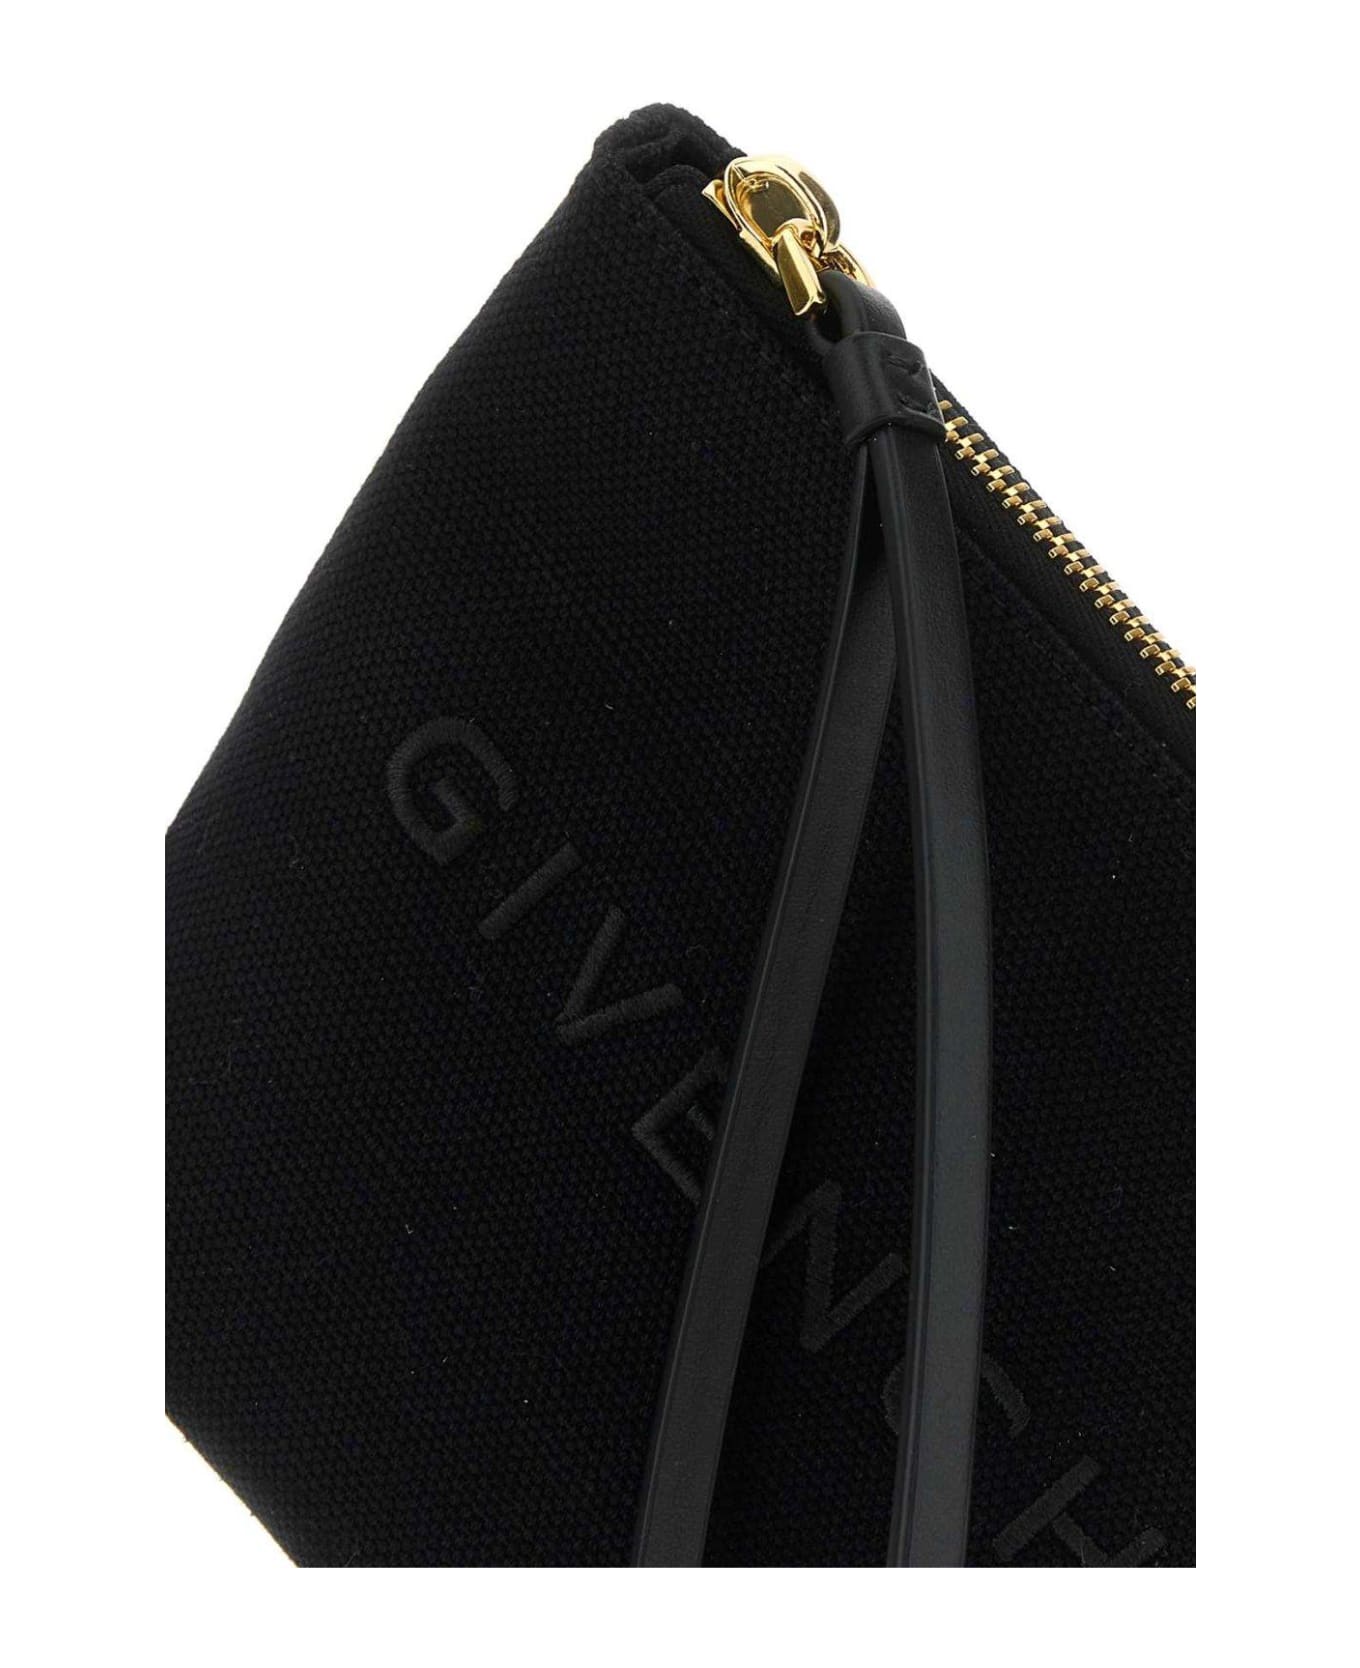 Givenchy Logo Printed Zipped Clutch Bag - Black トートバッグ